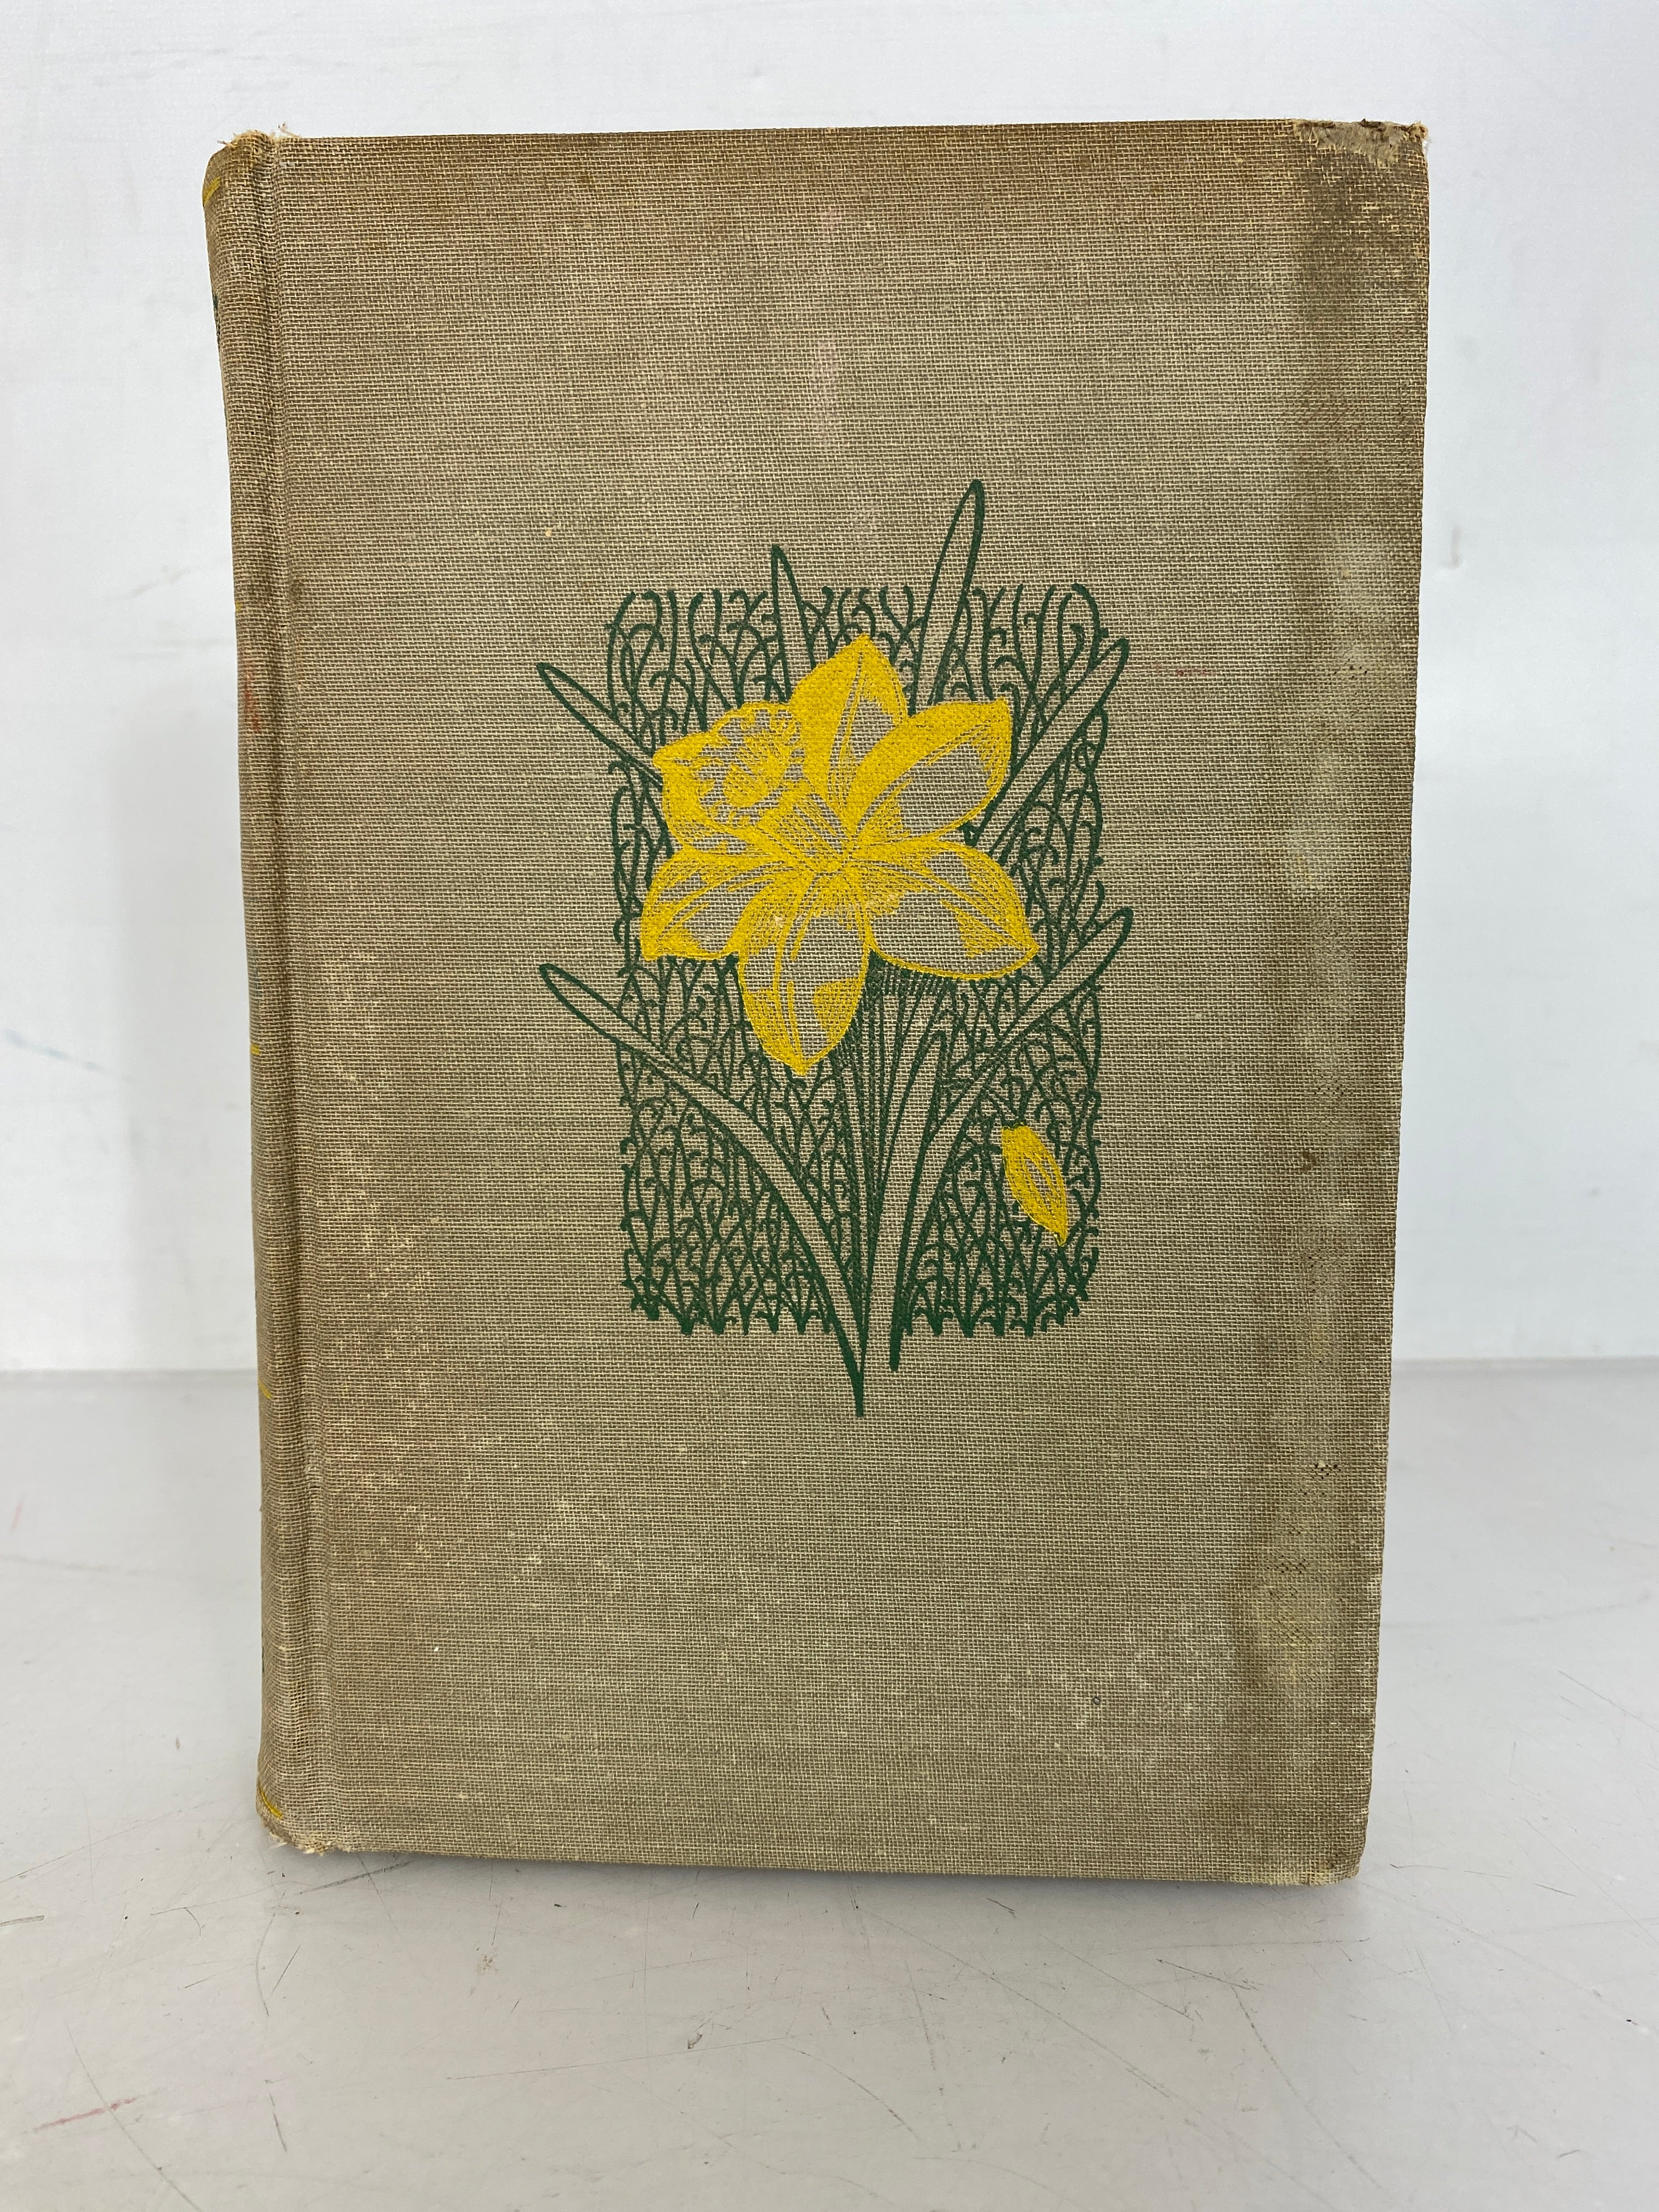 Vintage Favorite Flowers in Color by Seymour, Downer, Frese, Esson, and Everett 1949 HC